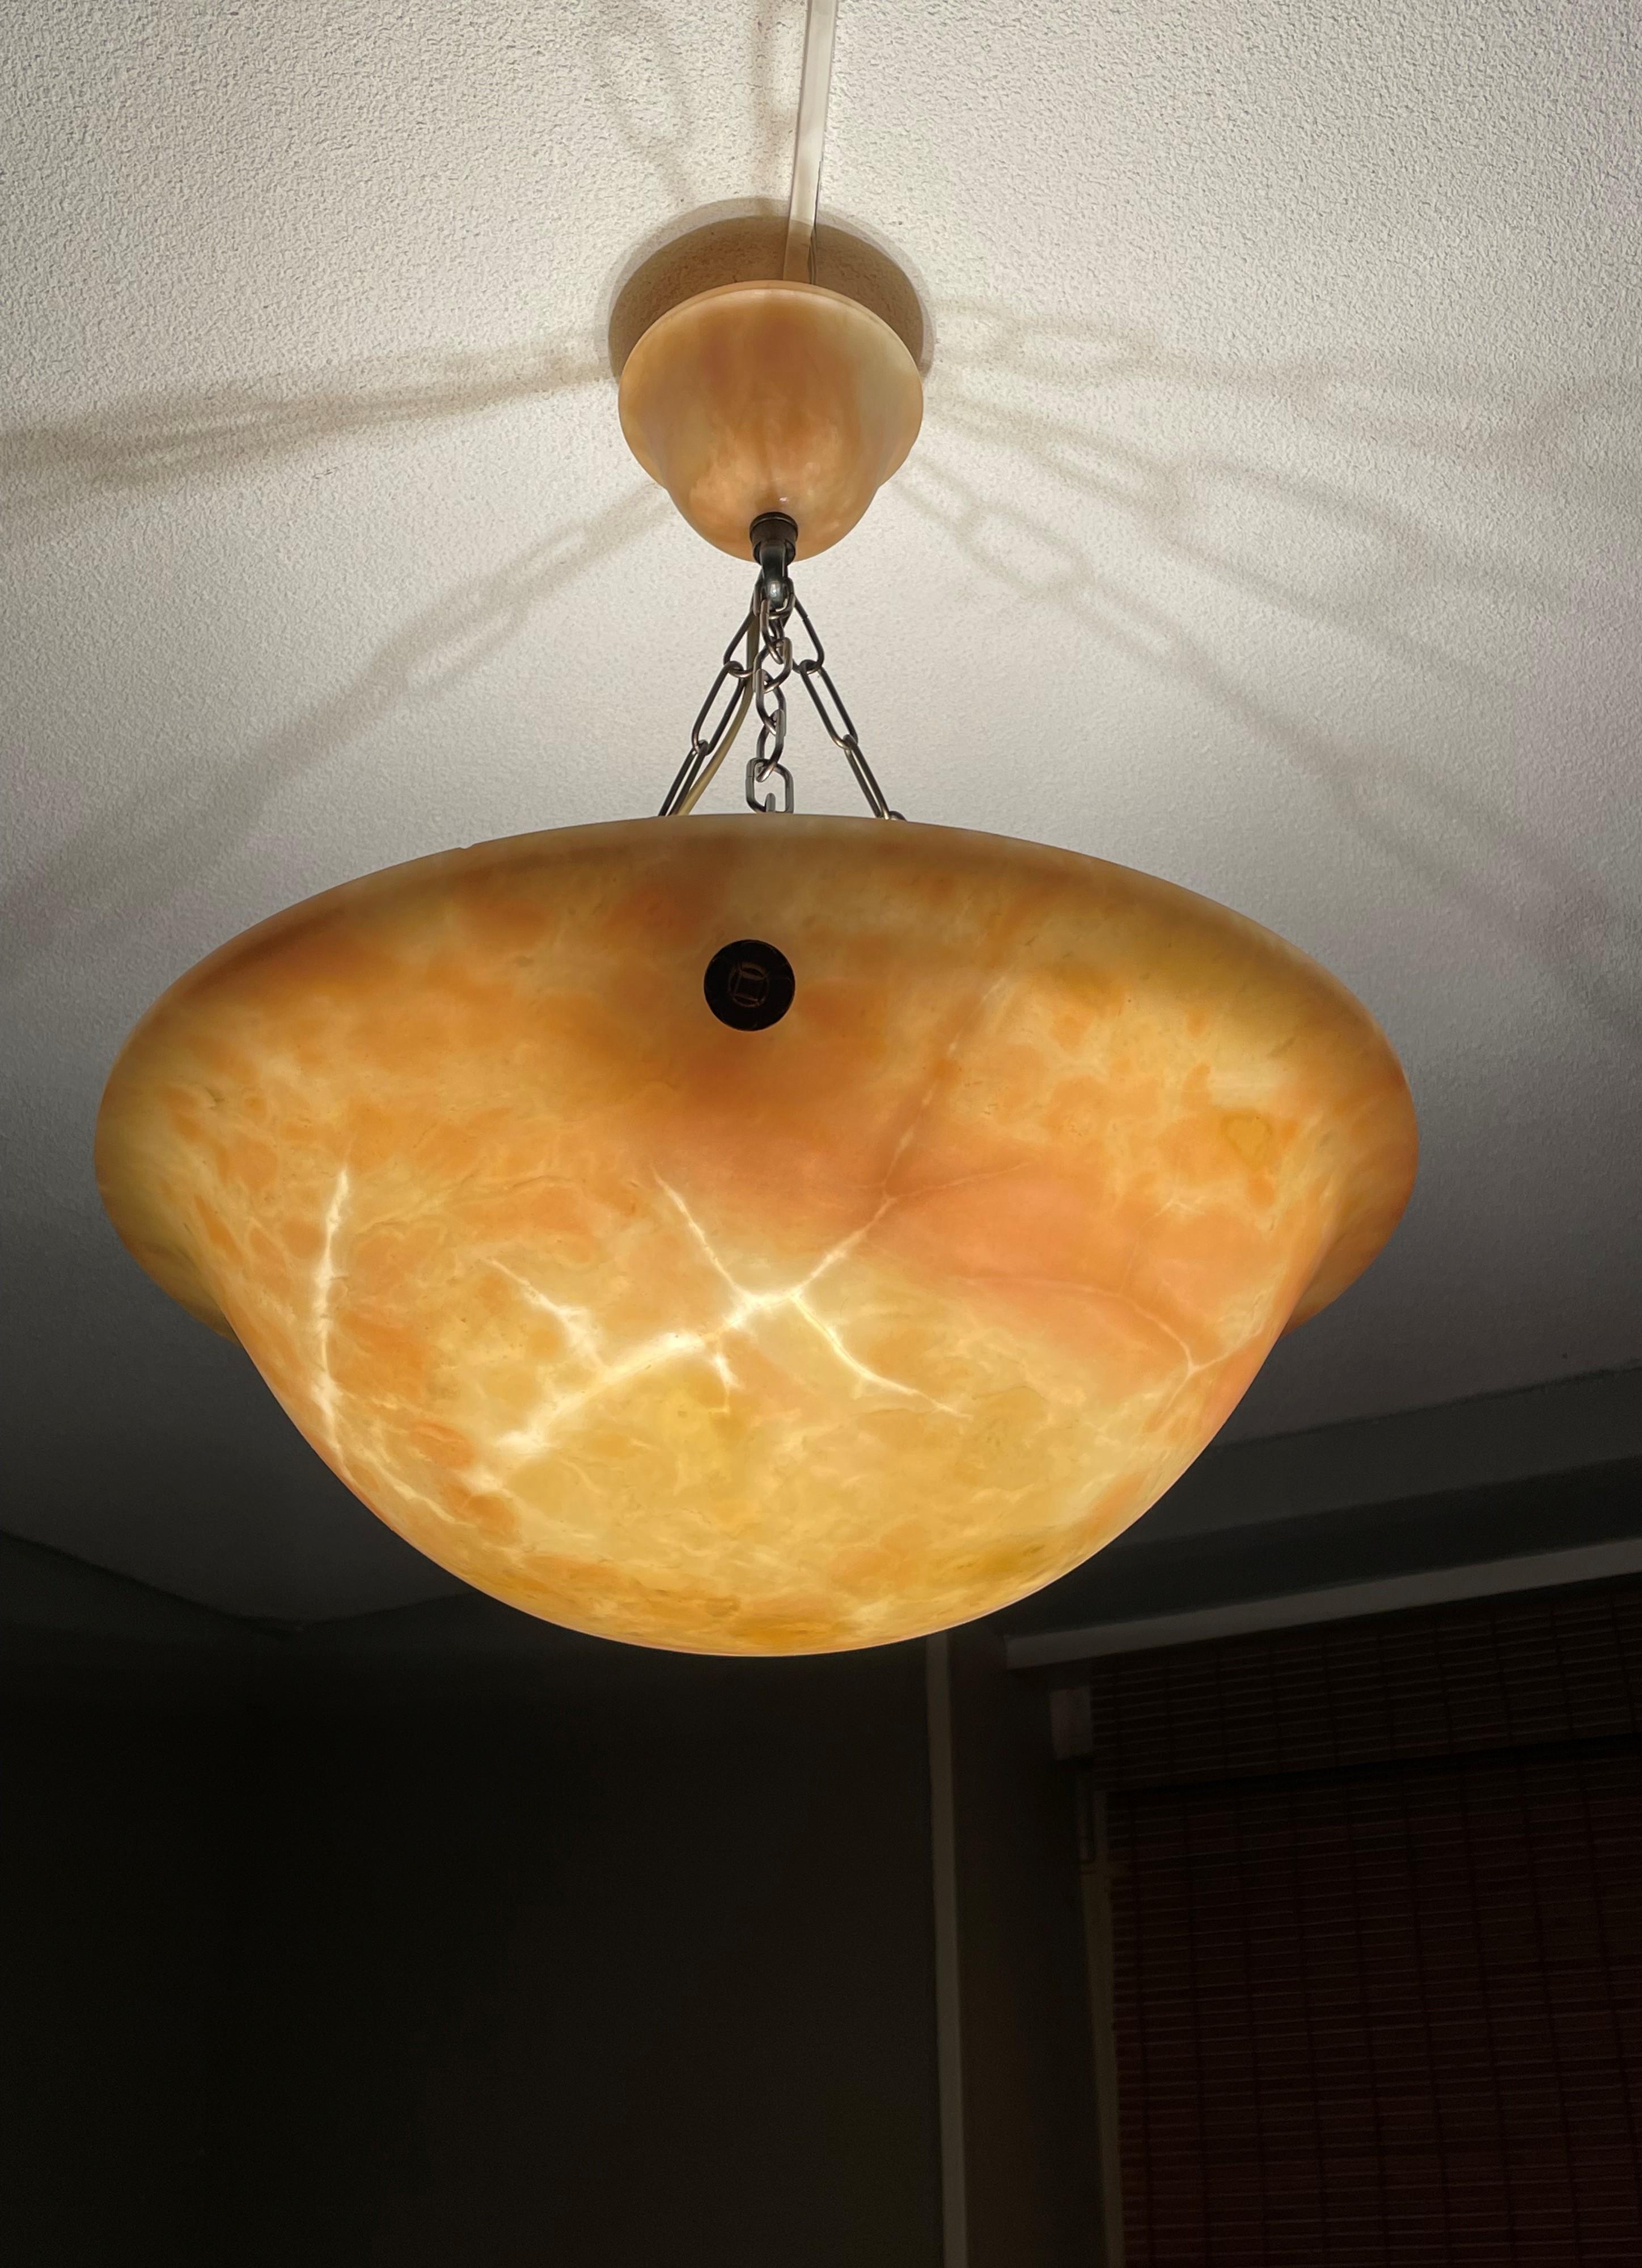 Unique 3-light alabaster pendant with amber colored patches/clouds and lightning white veins. 

One of the qualities of alabaster pendants is that no two shades will ever be exactly the same. Mother Nature created this mineral stone over the